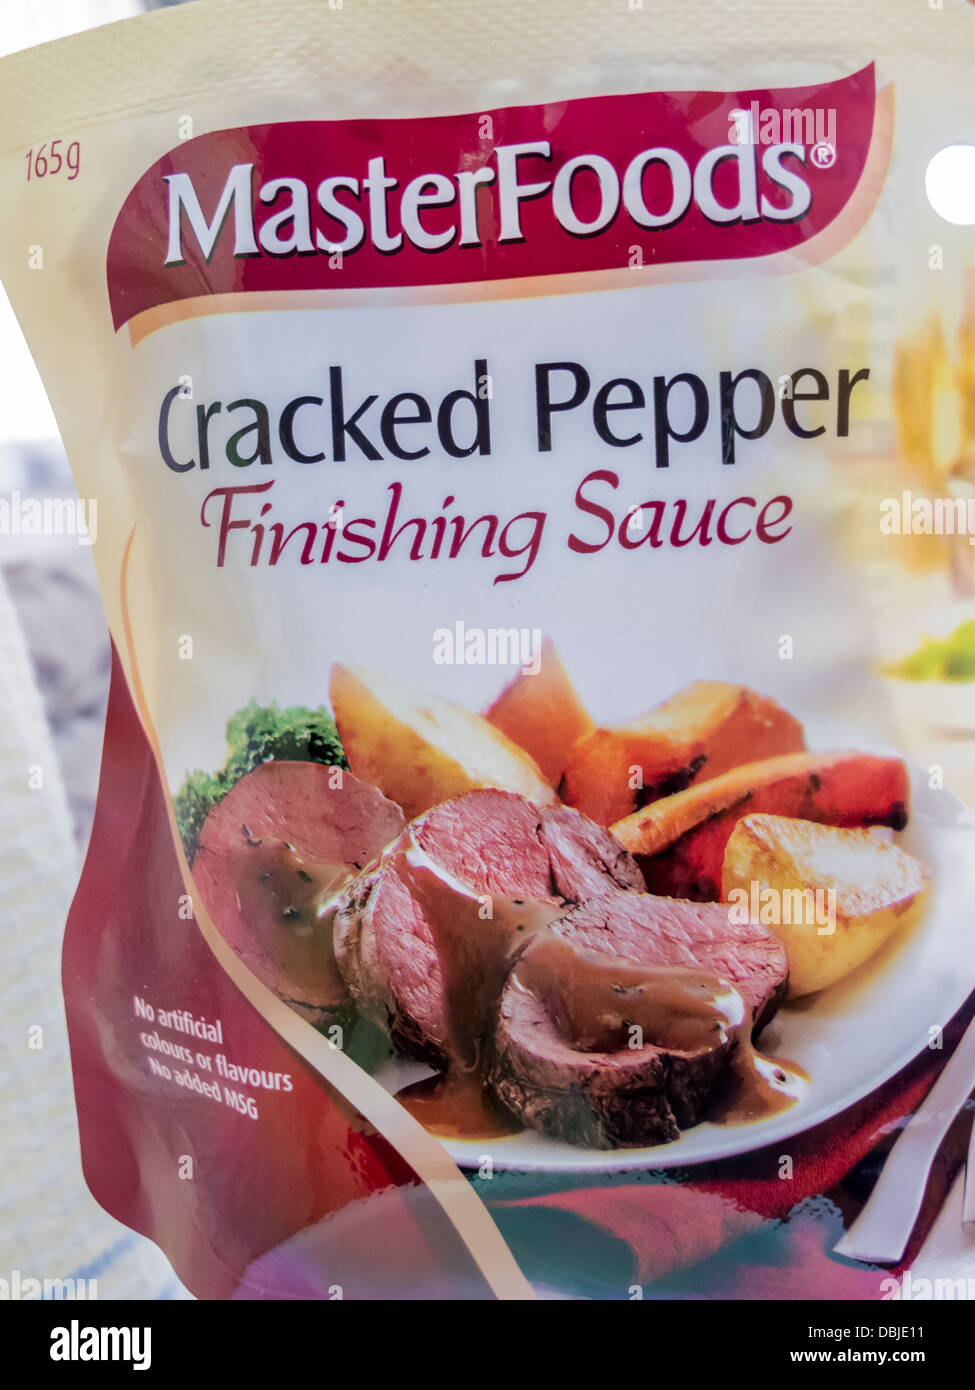 https://c8.alamy.com/comp/DBJE11/masterfoods-cracked-pepper-finishing-sauce-product-closeup-DBJE11.jpg